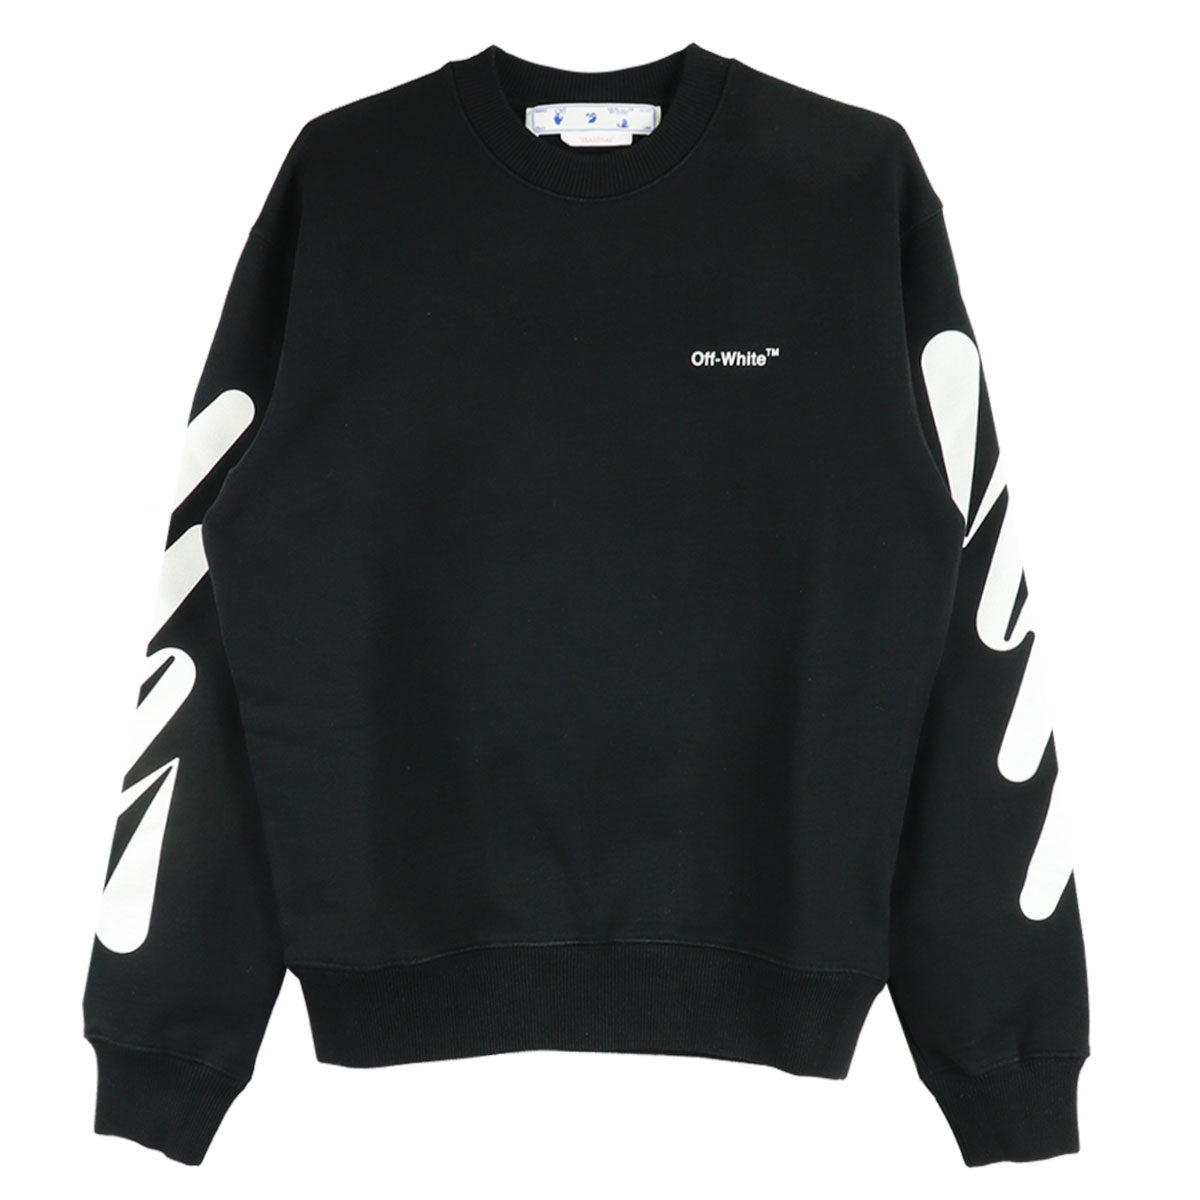 WAVE DIAG SLIM CREWNECK | Why are you here?